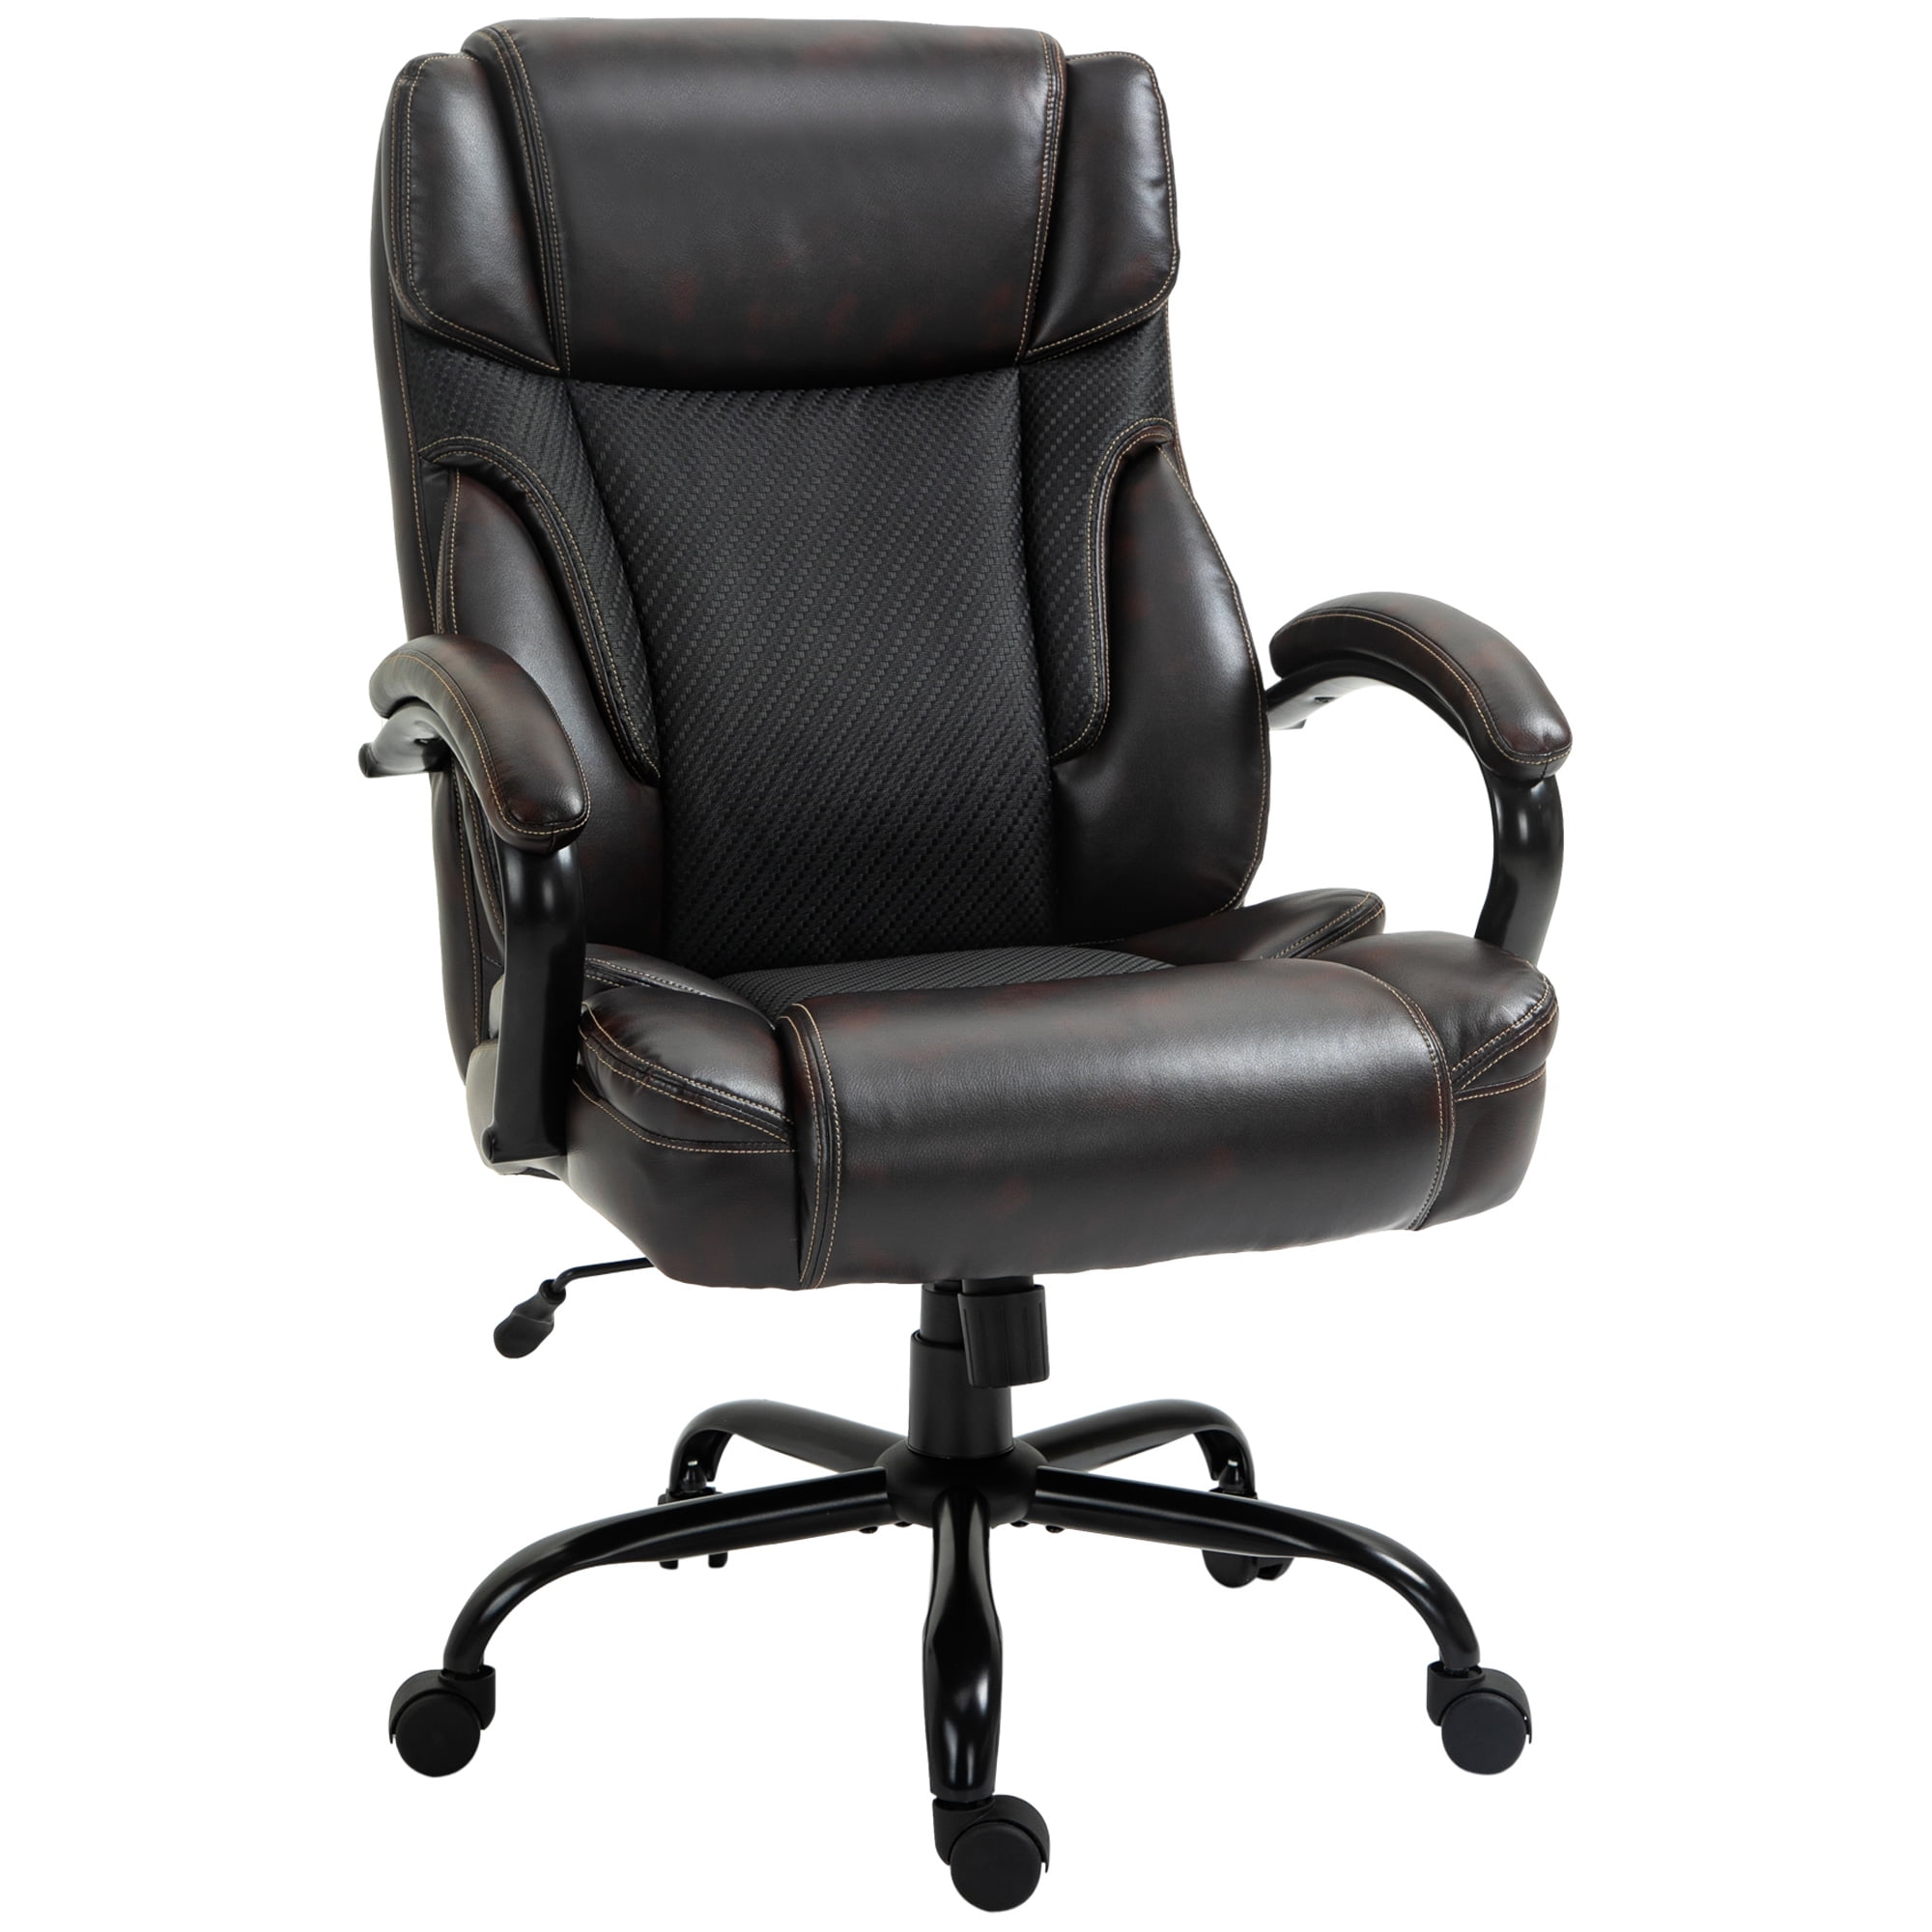 Black EXECUTIVE LEATHER OFFICE Chair Computer Desk Task Brown Gray Ergonomic 